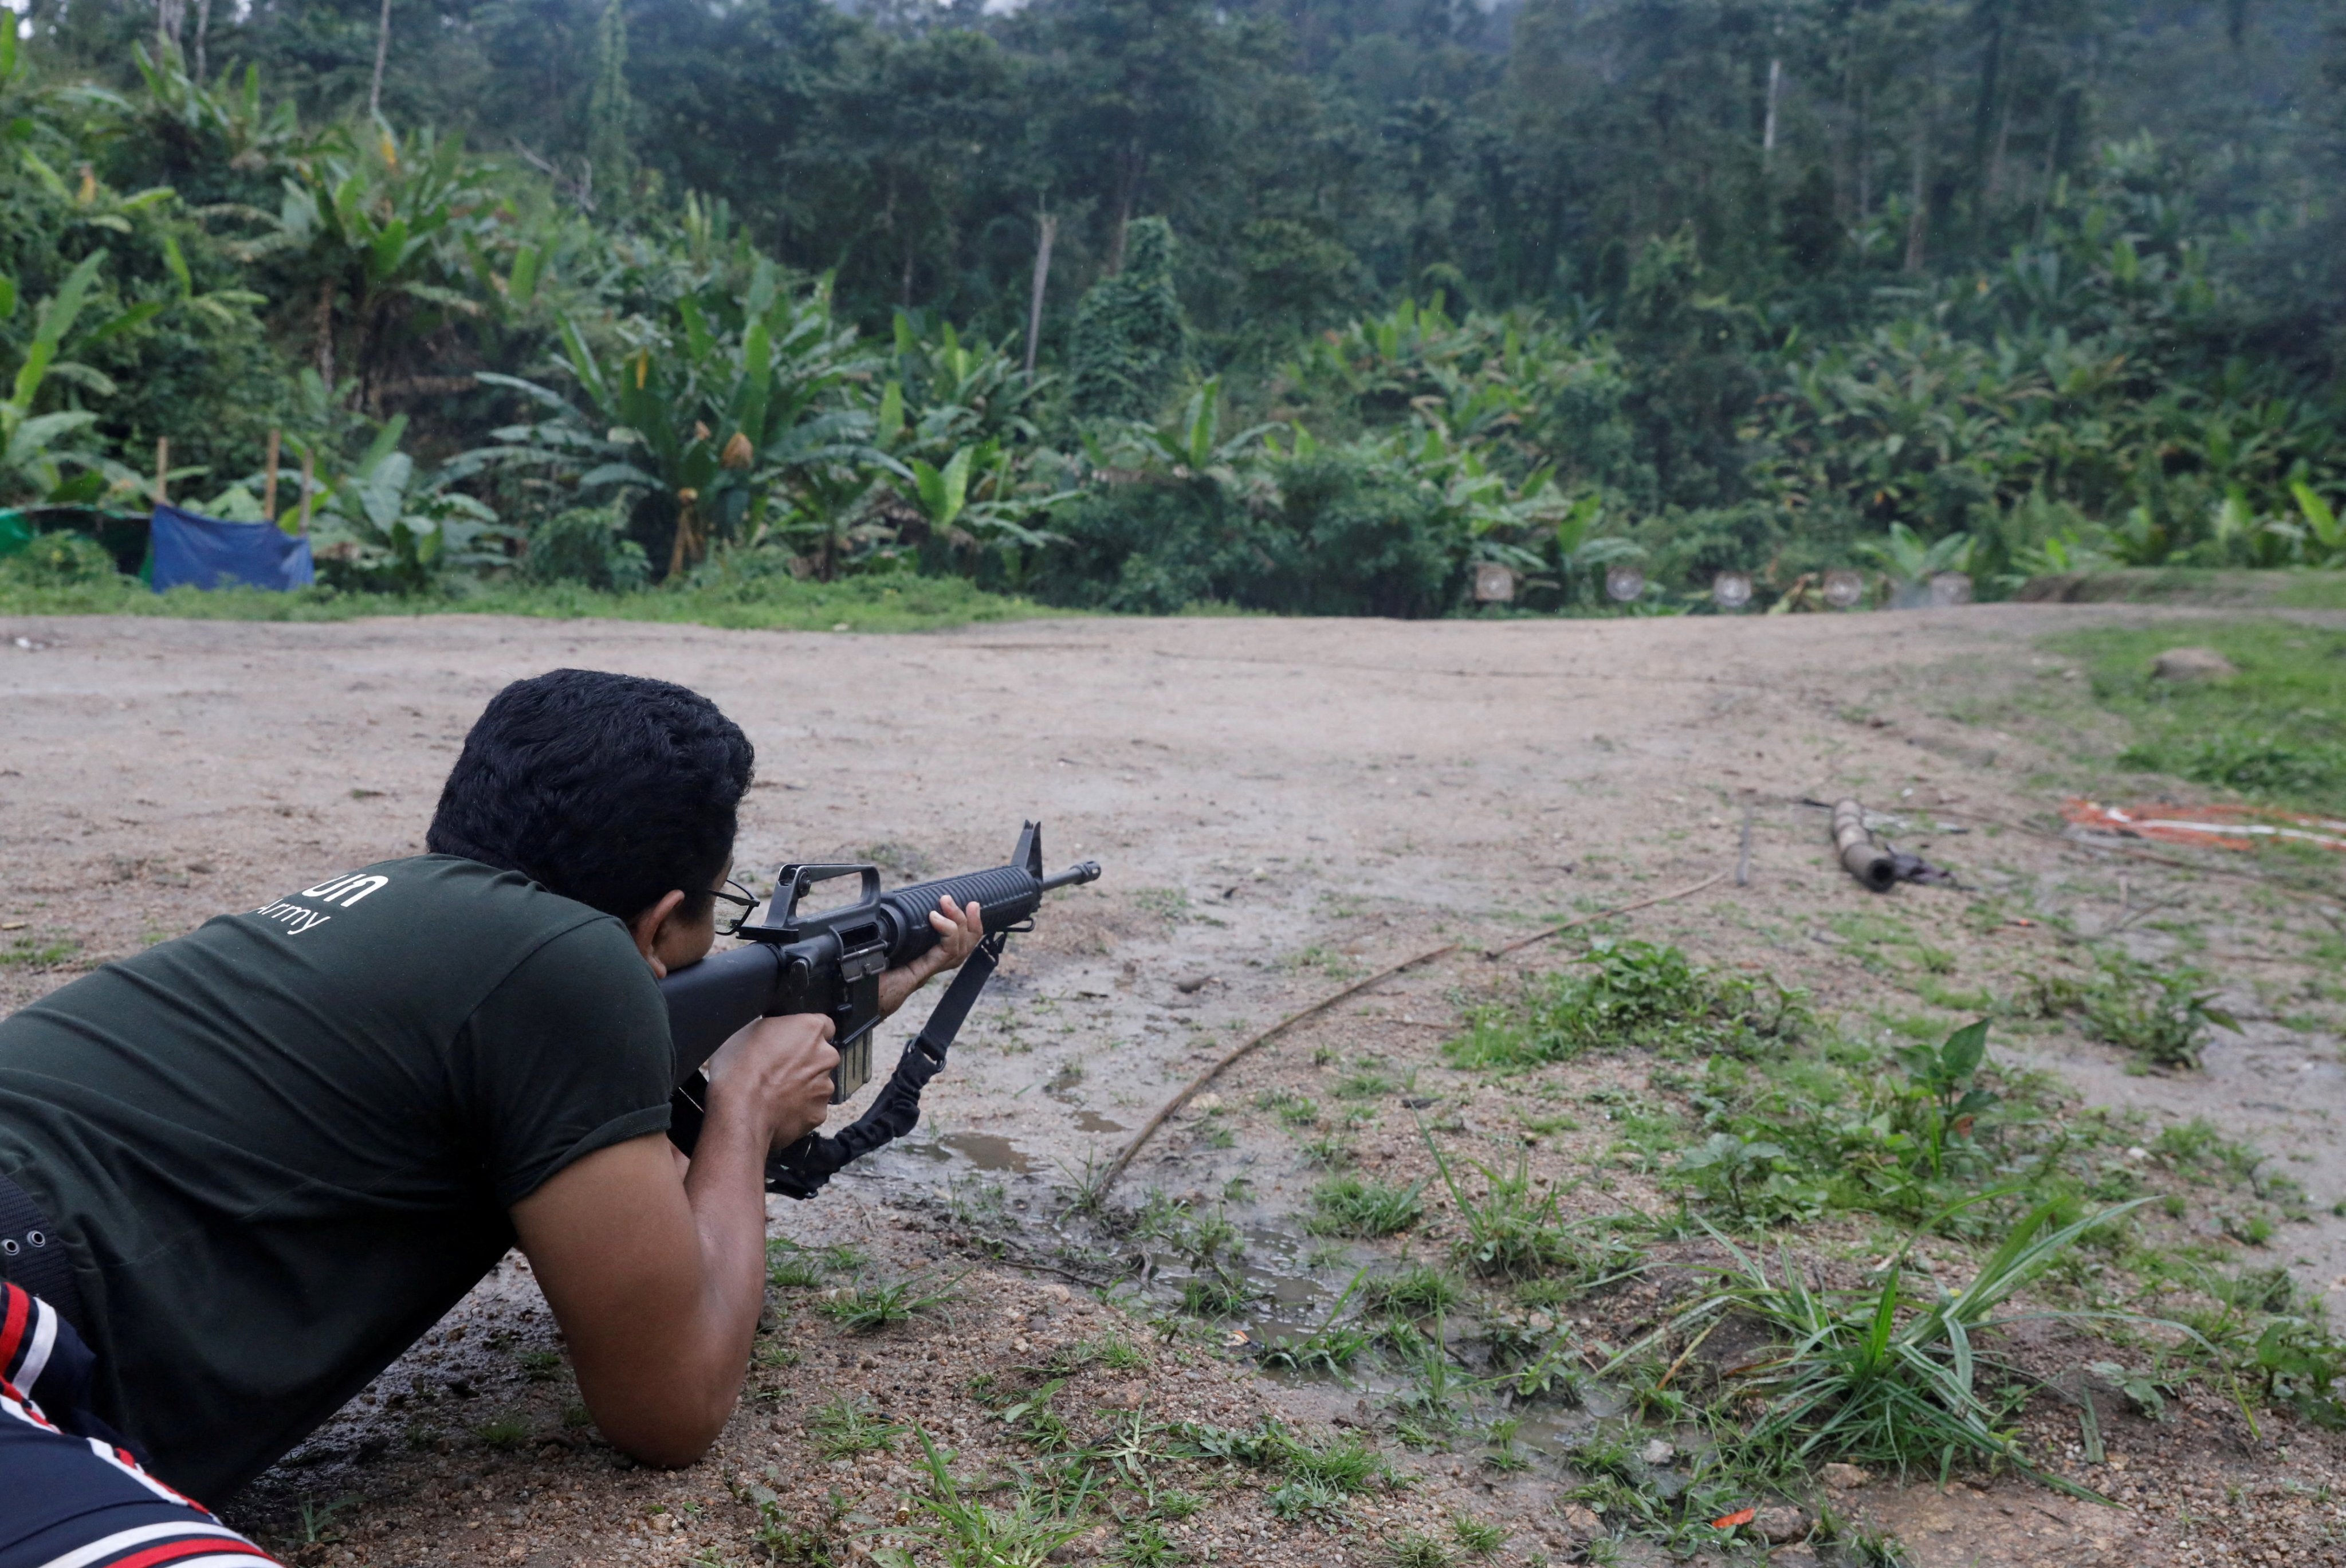 A former elected MP aims a firearm as he trains at a camp run by ethnic Karen rebels in Kayin State, Myanmar, last year. Photo: Reuters